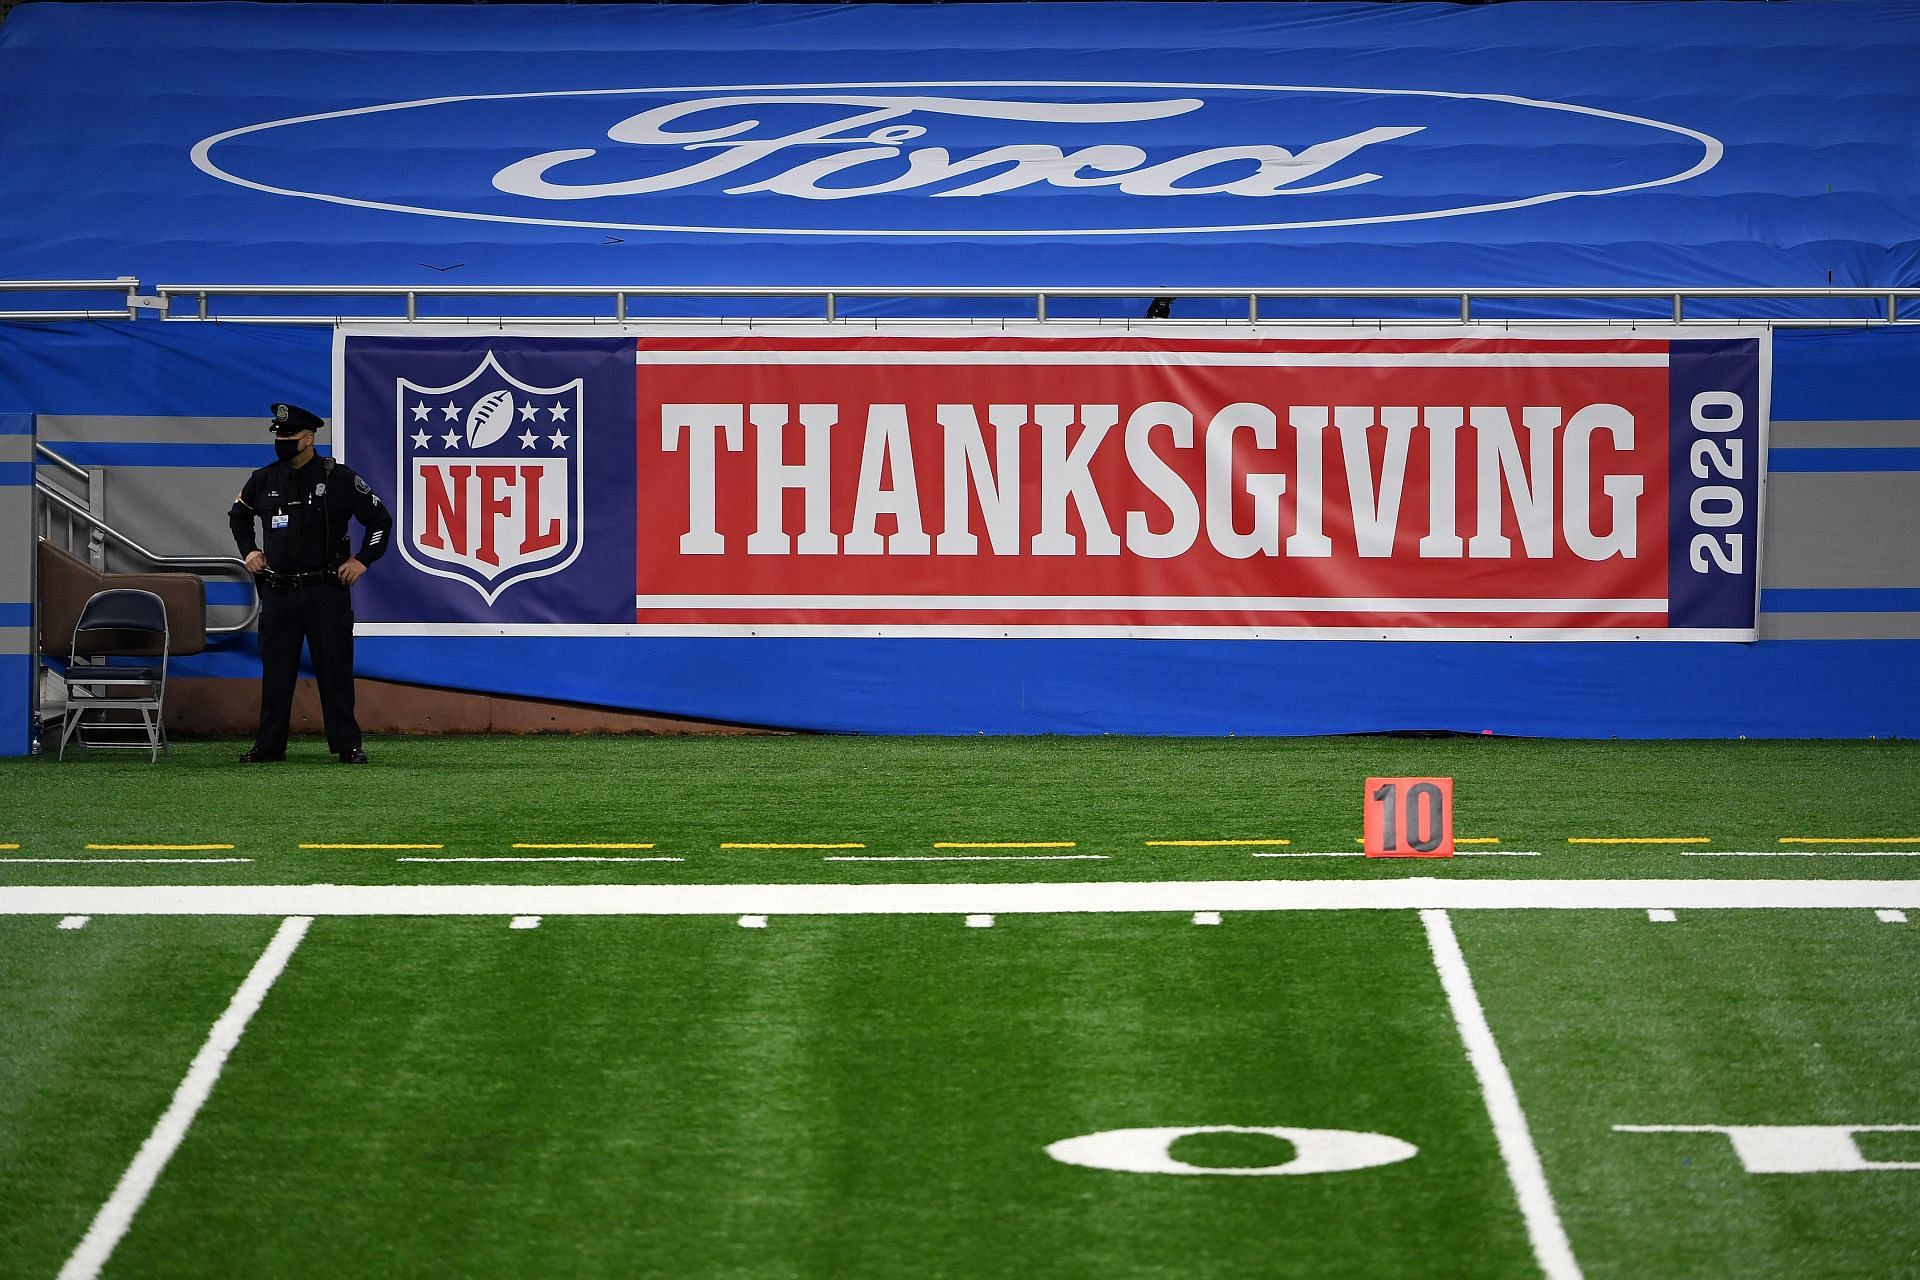 NFL Thanksgiving Schedule 2015: Game time, TV channel, online streaming,  how to watch, and more - Bleeding Green Nation